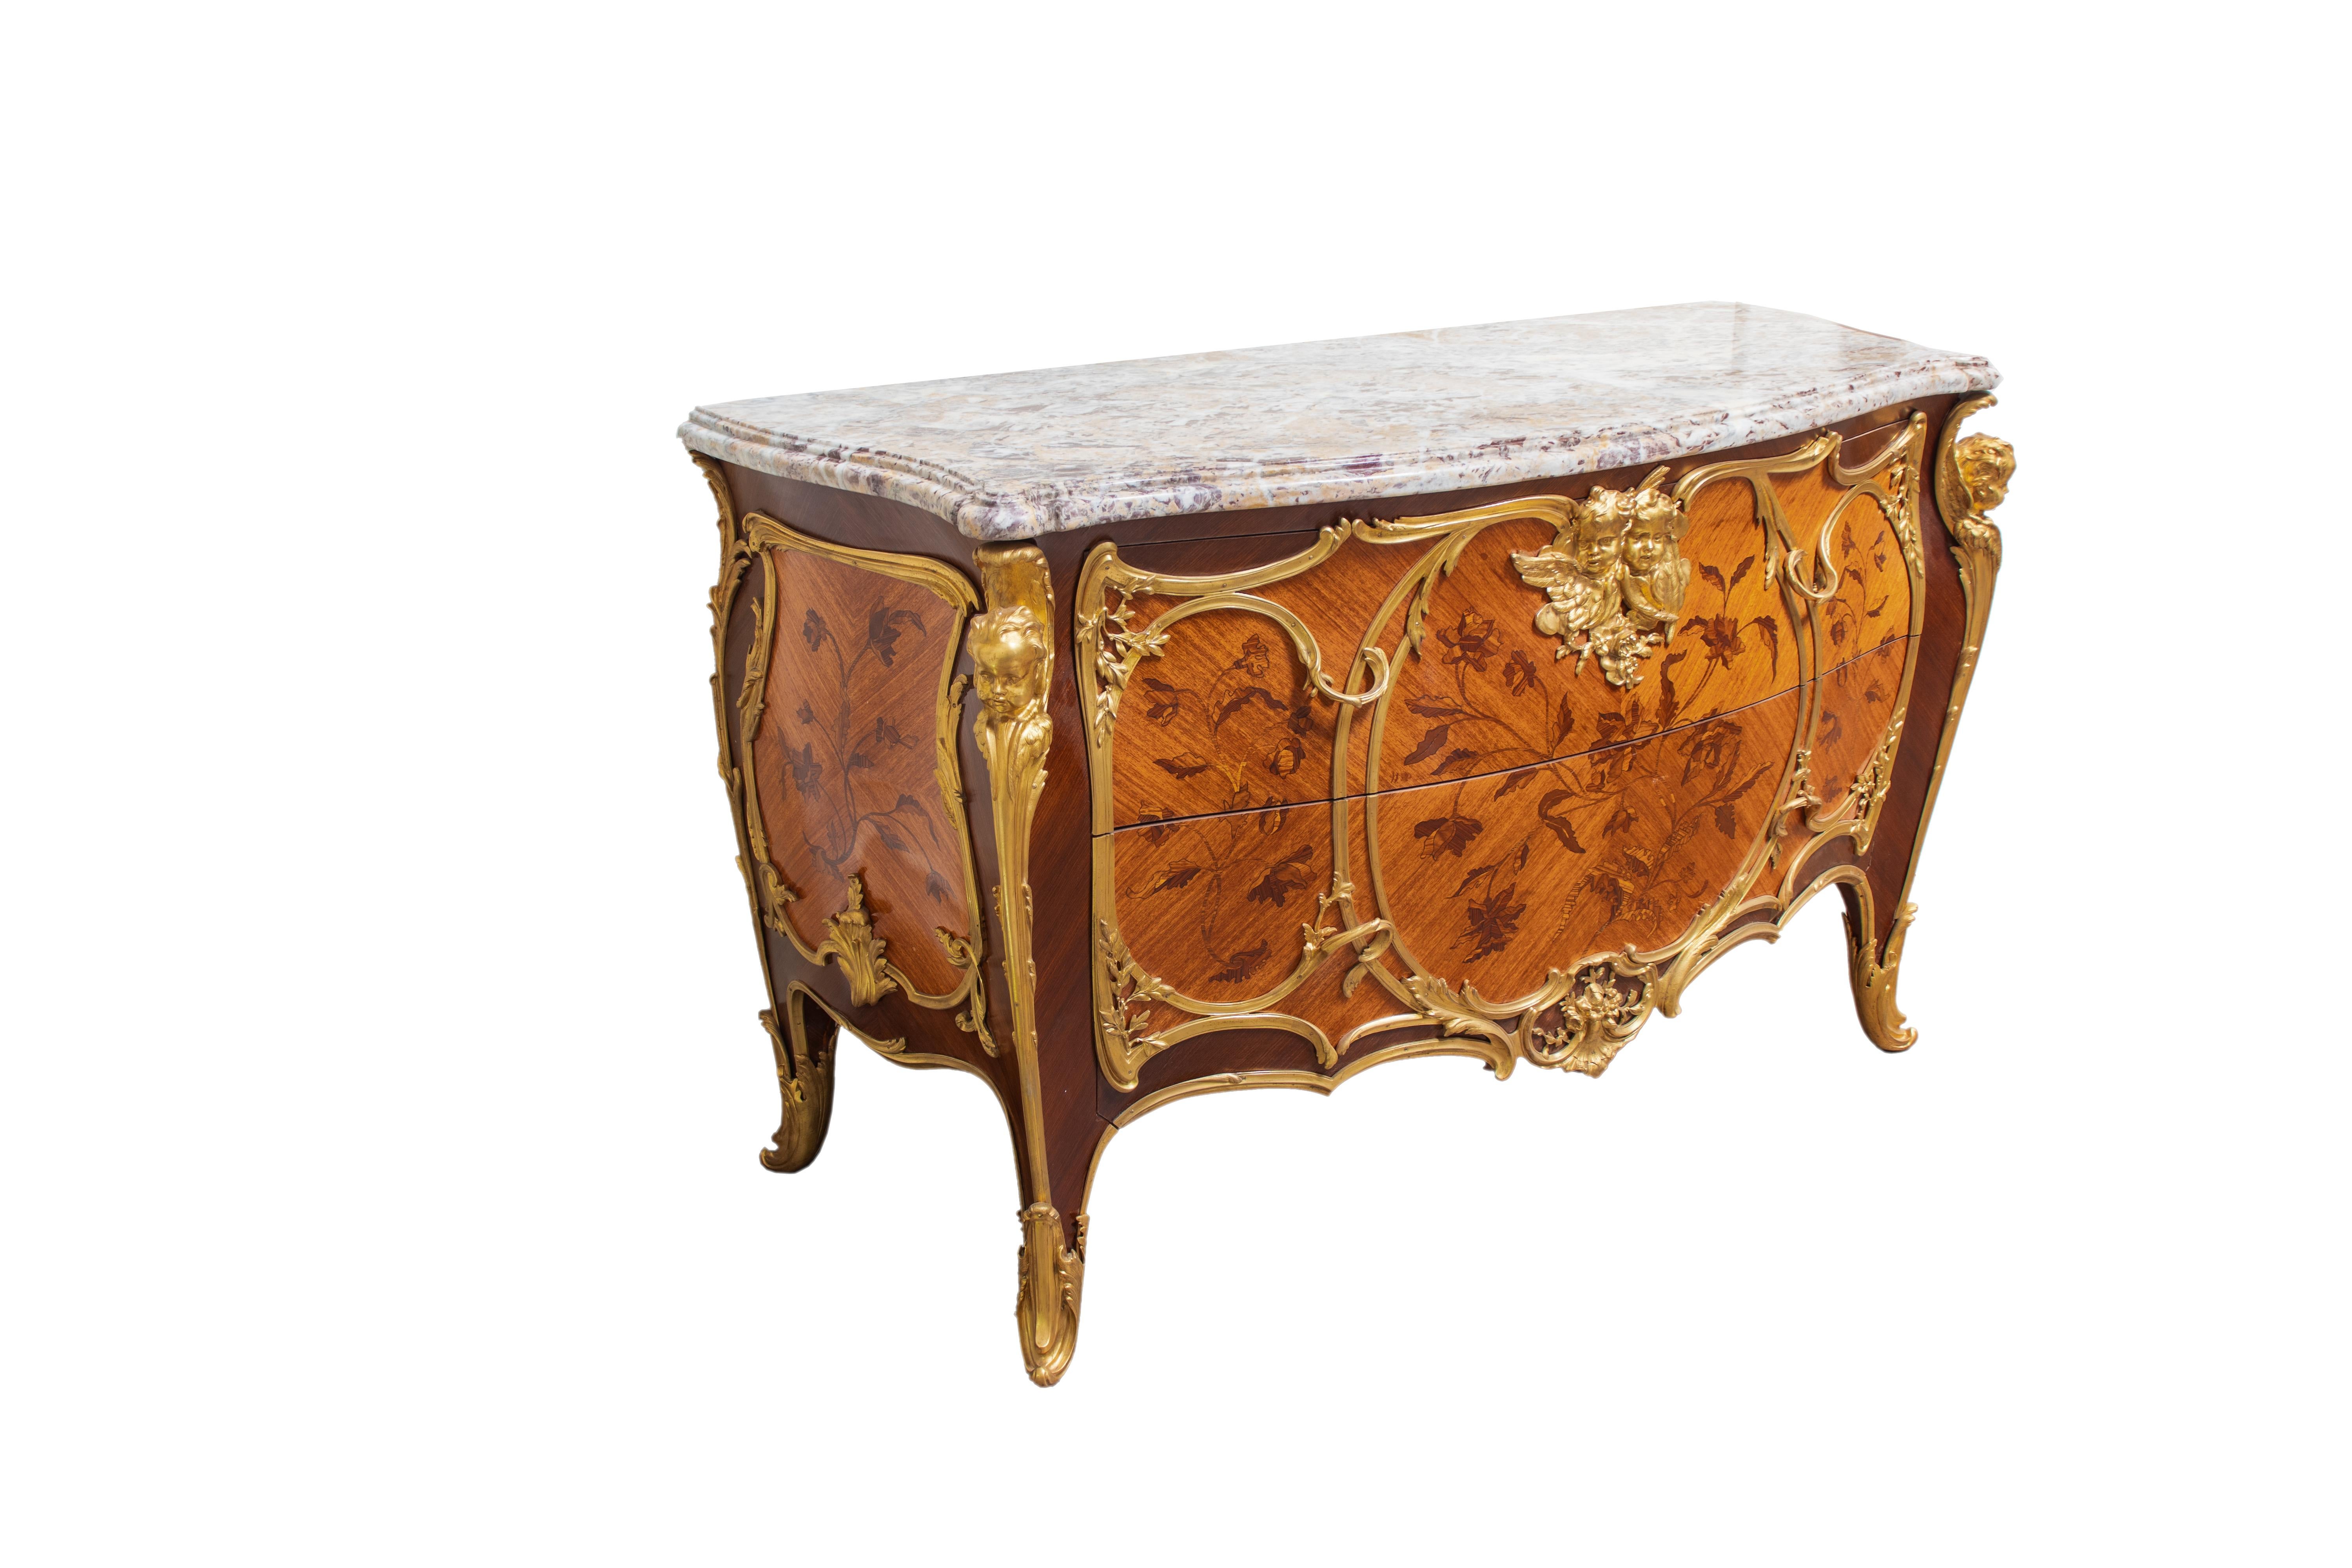 Pair of French Commodes in Louis XV style with Ormolu Mounts and Marquetry For Sale 1